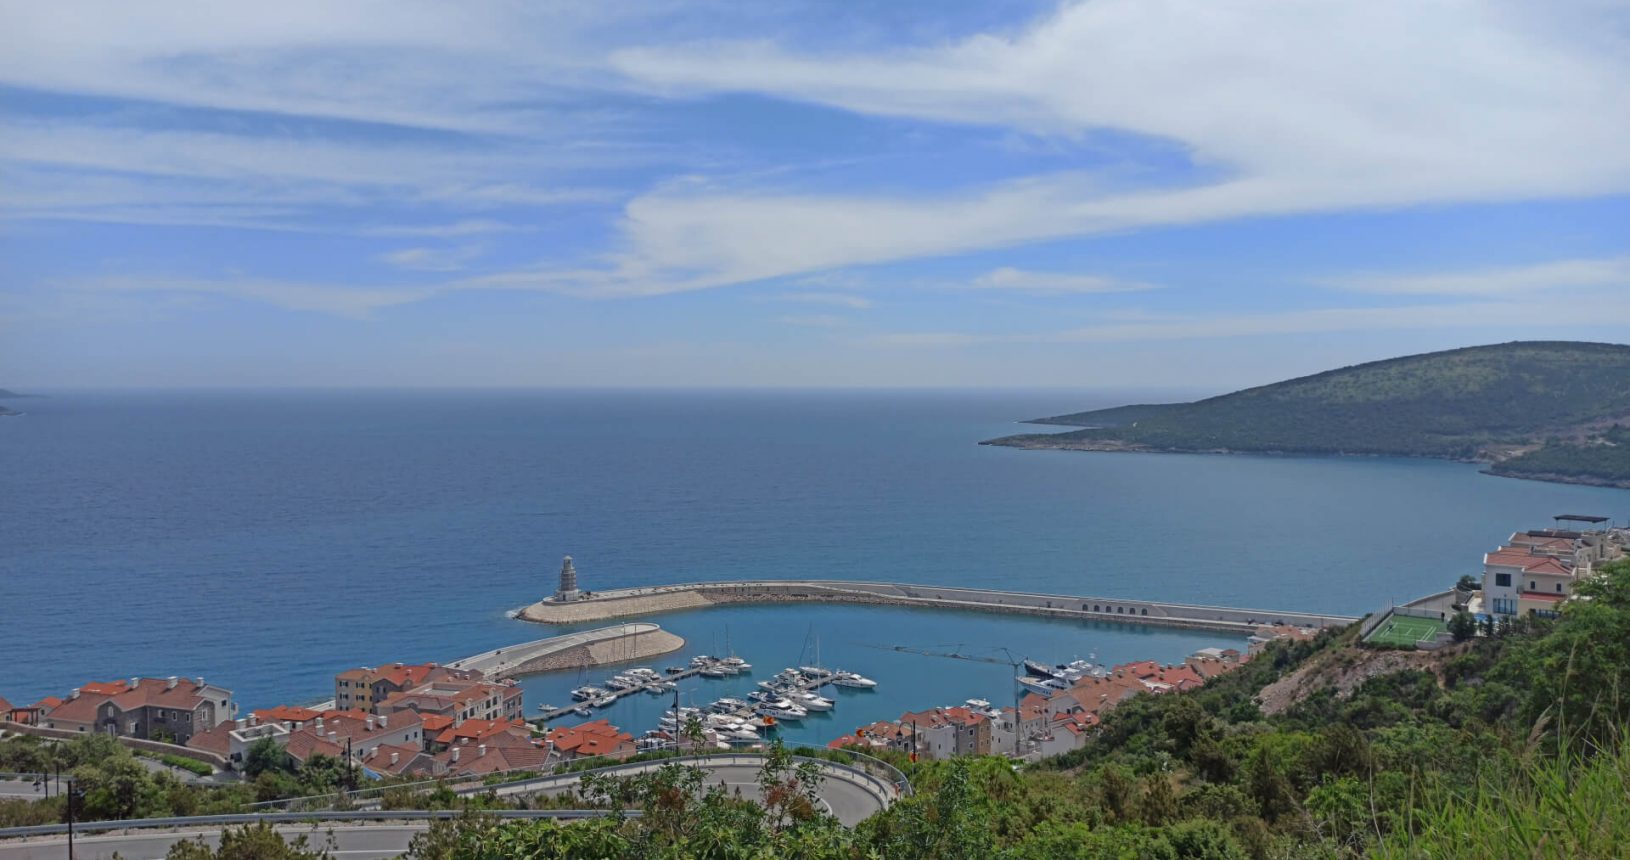 Lustica Bay from the hill